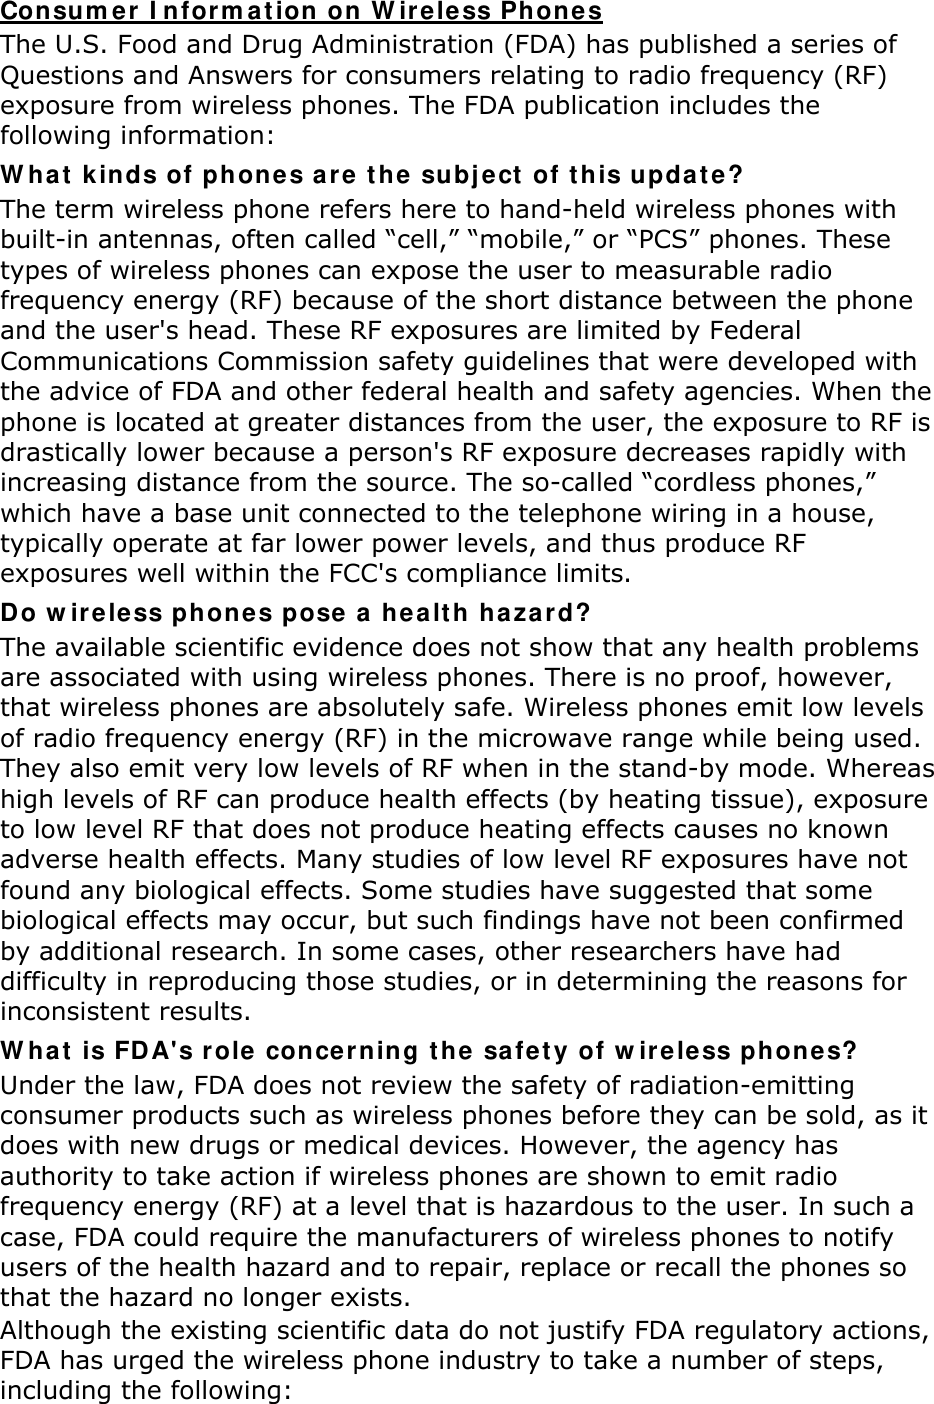 Con sum er I nfor m at ion  on W ir e less Phones The U.S. Food and Drug Administration (FDA) has published a series of Questions and Answers for consumers relating to radio frequency (RF) exposure from wireless phones. The FDA publication includes the following information: W ha t  k inds of phon e s are t he  subj ect  of t his updat e? The term wireless phone refers here to hand-held wireless phones with built-in antennas, often called “cell,” “mobile,” or “PCS” phones. These types of wireless phones can expose the user to measurable radio frequency energy (RF) because of the short distance between the phone and the user&apos;s head. These RF exposures are limited by Federal Communications Commission safety guidelines that were developed with the advice of FDA and other federal health and safety agencies. When the phone is located at greater distances from the user, the exposure to RF is drastically lower because a person&apos;s RF exposure decreases rapidly with increasing distance from the source. The so-called “cordless phones,” which have a base unit connected to the telephone wiring in a house, typically operate at far lower power levels, and thus produce RF exposures well within the FCC&apos;s compliance limits. Do w ireless phone s pose  a healt h ha za r d? The available scientific evidence does not show that any health problems are associated with using wireless phones. There is no proof, however, that wireless phones are absolutely safe. Wireless phones emit low levels of radio frequency energy (RF) in the microwave range while being used. They also emit very low levels of RF when in the stand-by mode. Whereas high levels of RF can produce health effects (by heating tissue), exposure to low level RF that does not produce heating effects causes no known adverse health effects. Many studies of low level RF exposures have not found any biological effects. Some studies have suggested that some biological effects may occur, but such findings have not been confirmed by additional research. In some cases, other researchers have had difficulty in reproducing those studies, or in determining the reasons for inconsistent results. W ha t  is FDA&apos;s r ole conce r ning t he  safet y of w ireless phone s? Under the law, FDA does not review the safety of radiation-emitting consumer products such as wireless phones before they can be sold, as it does with new drugs or medical devices. However, the agency has authority to take action if wireless phones are shown to emit radio frequency energy (RF) at a level that is hazardous to the user. In such a case, FDA could require the manufacturers of wireless phones to notify users of the health hazard and to repair, replace or recall the phones so that the hazard no longer exists. Although the existing scientific data do not justify FDA regulatory actions, FDA has urged the wireless phone industry to take a number of steps, including the following: 